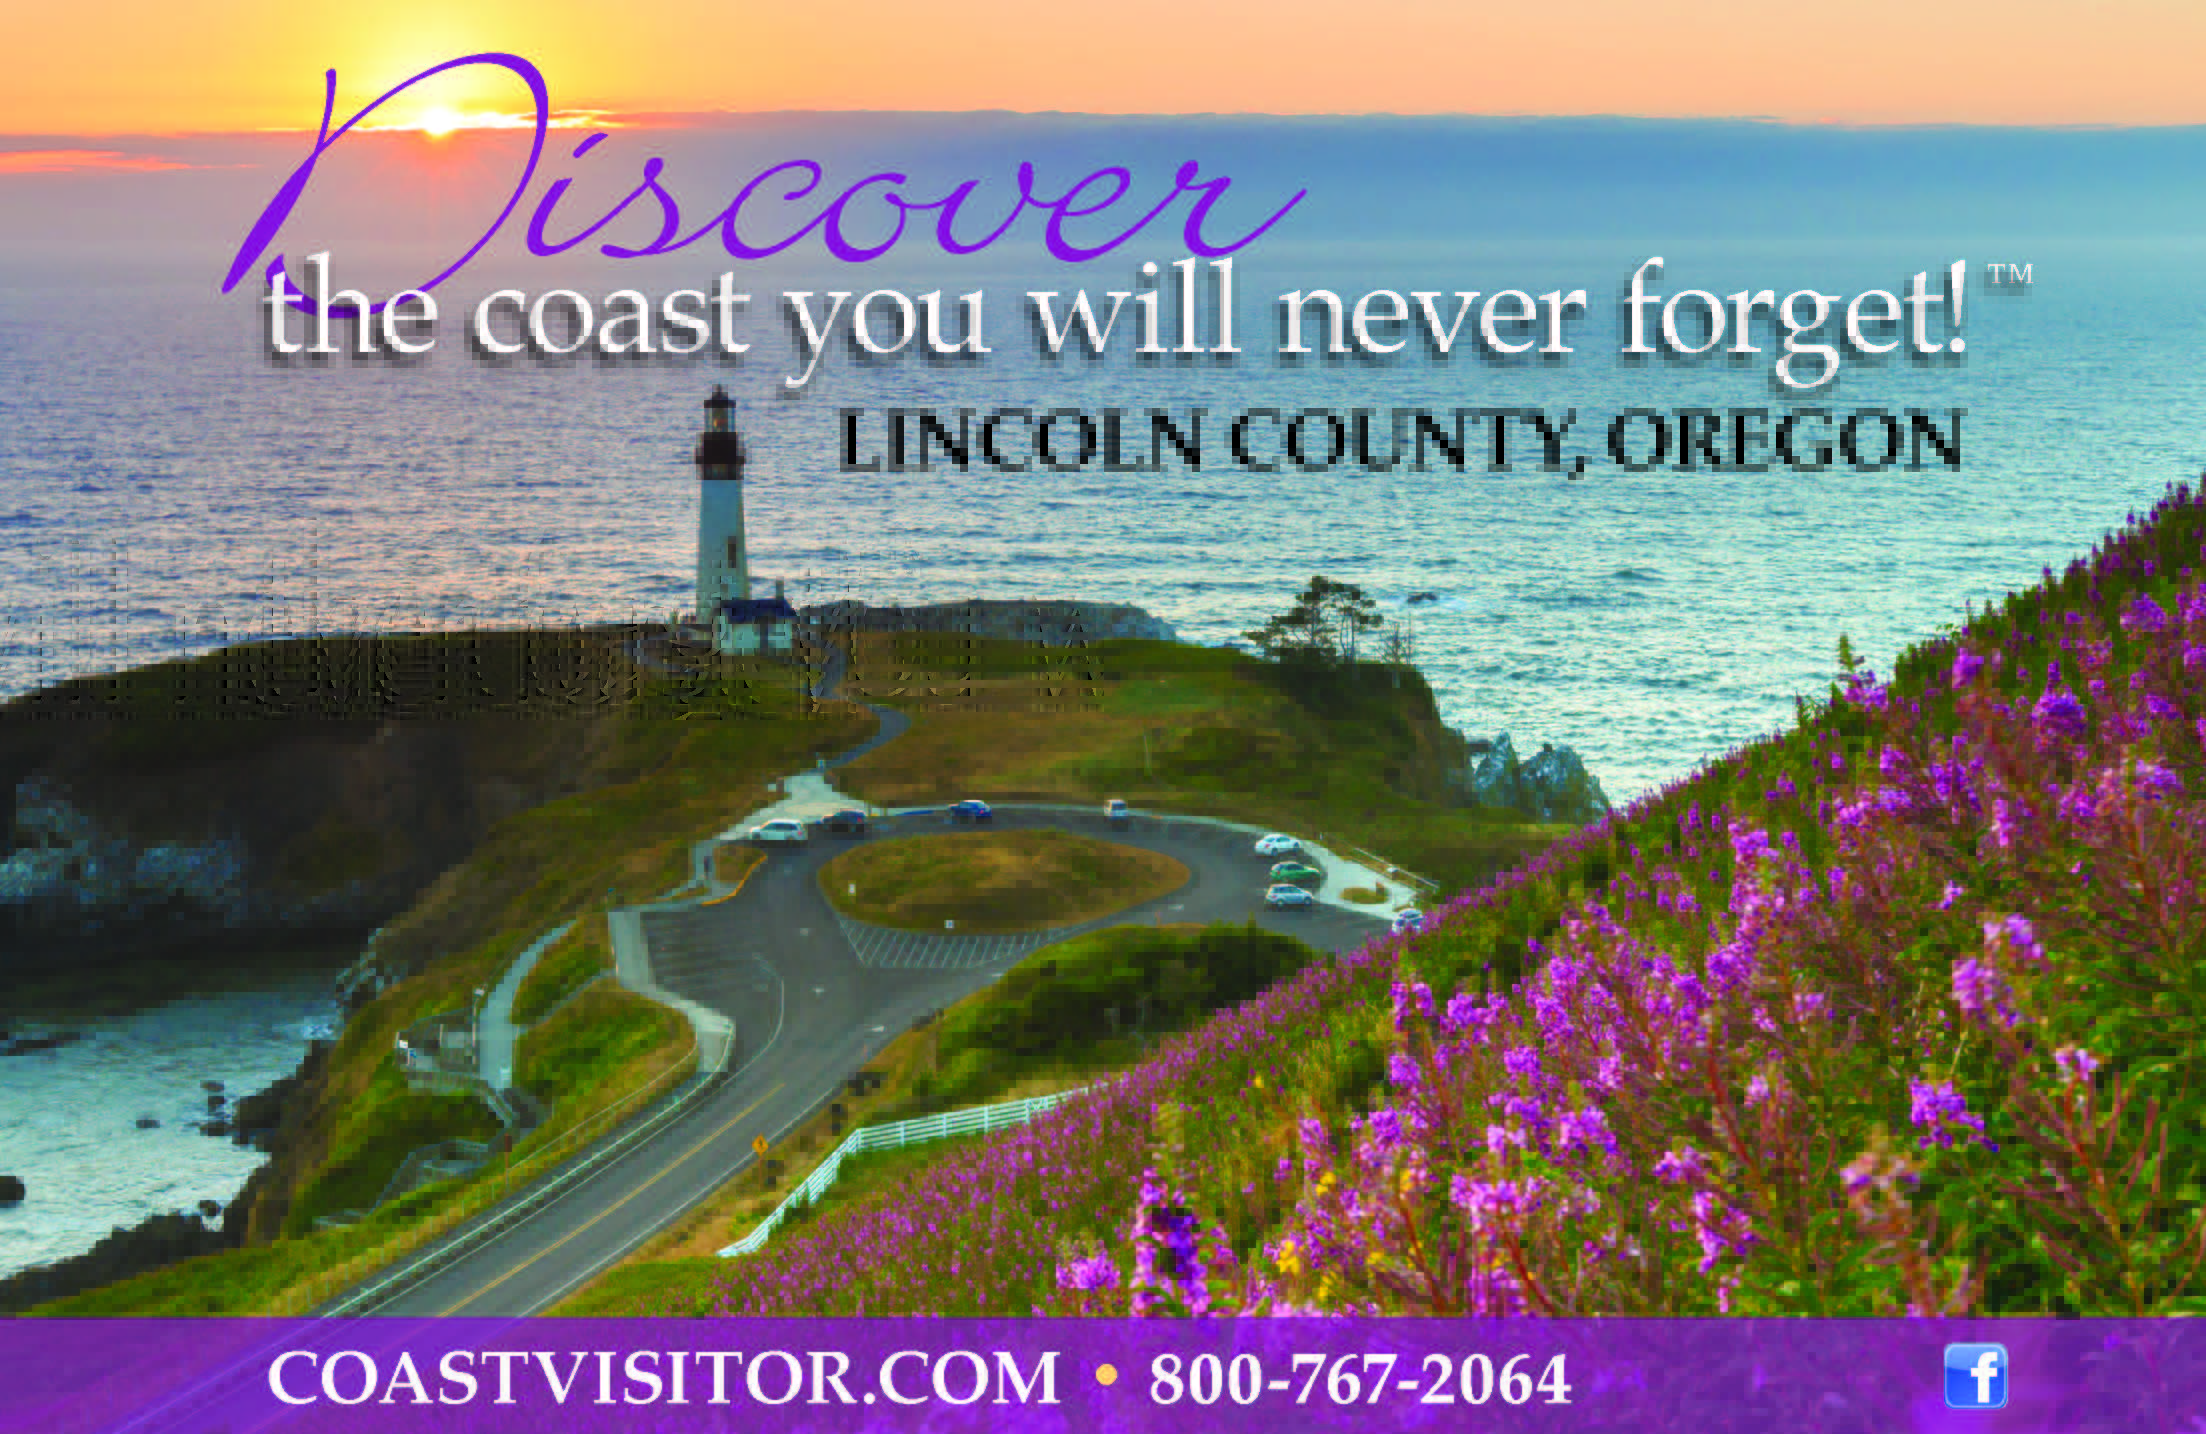 Coast Visitor poster